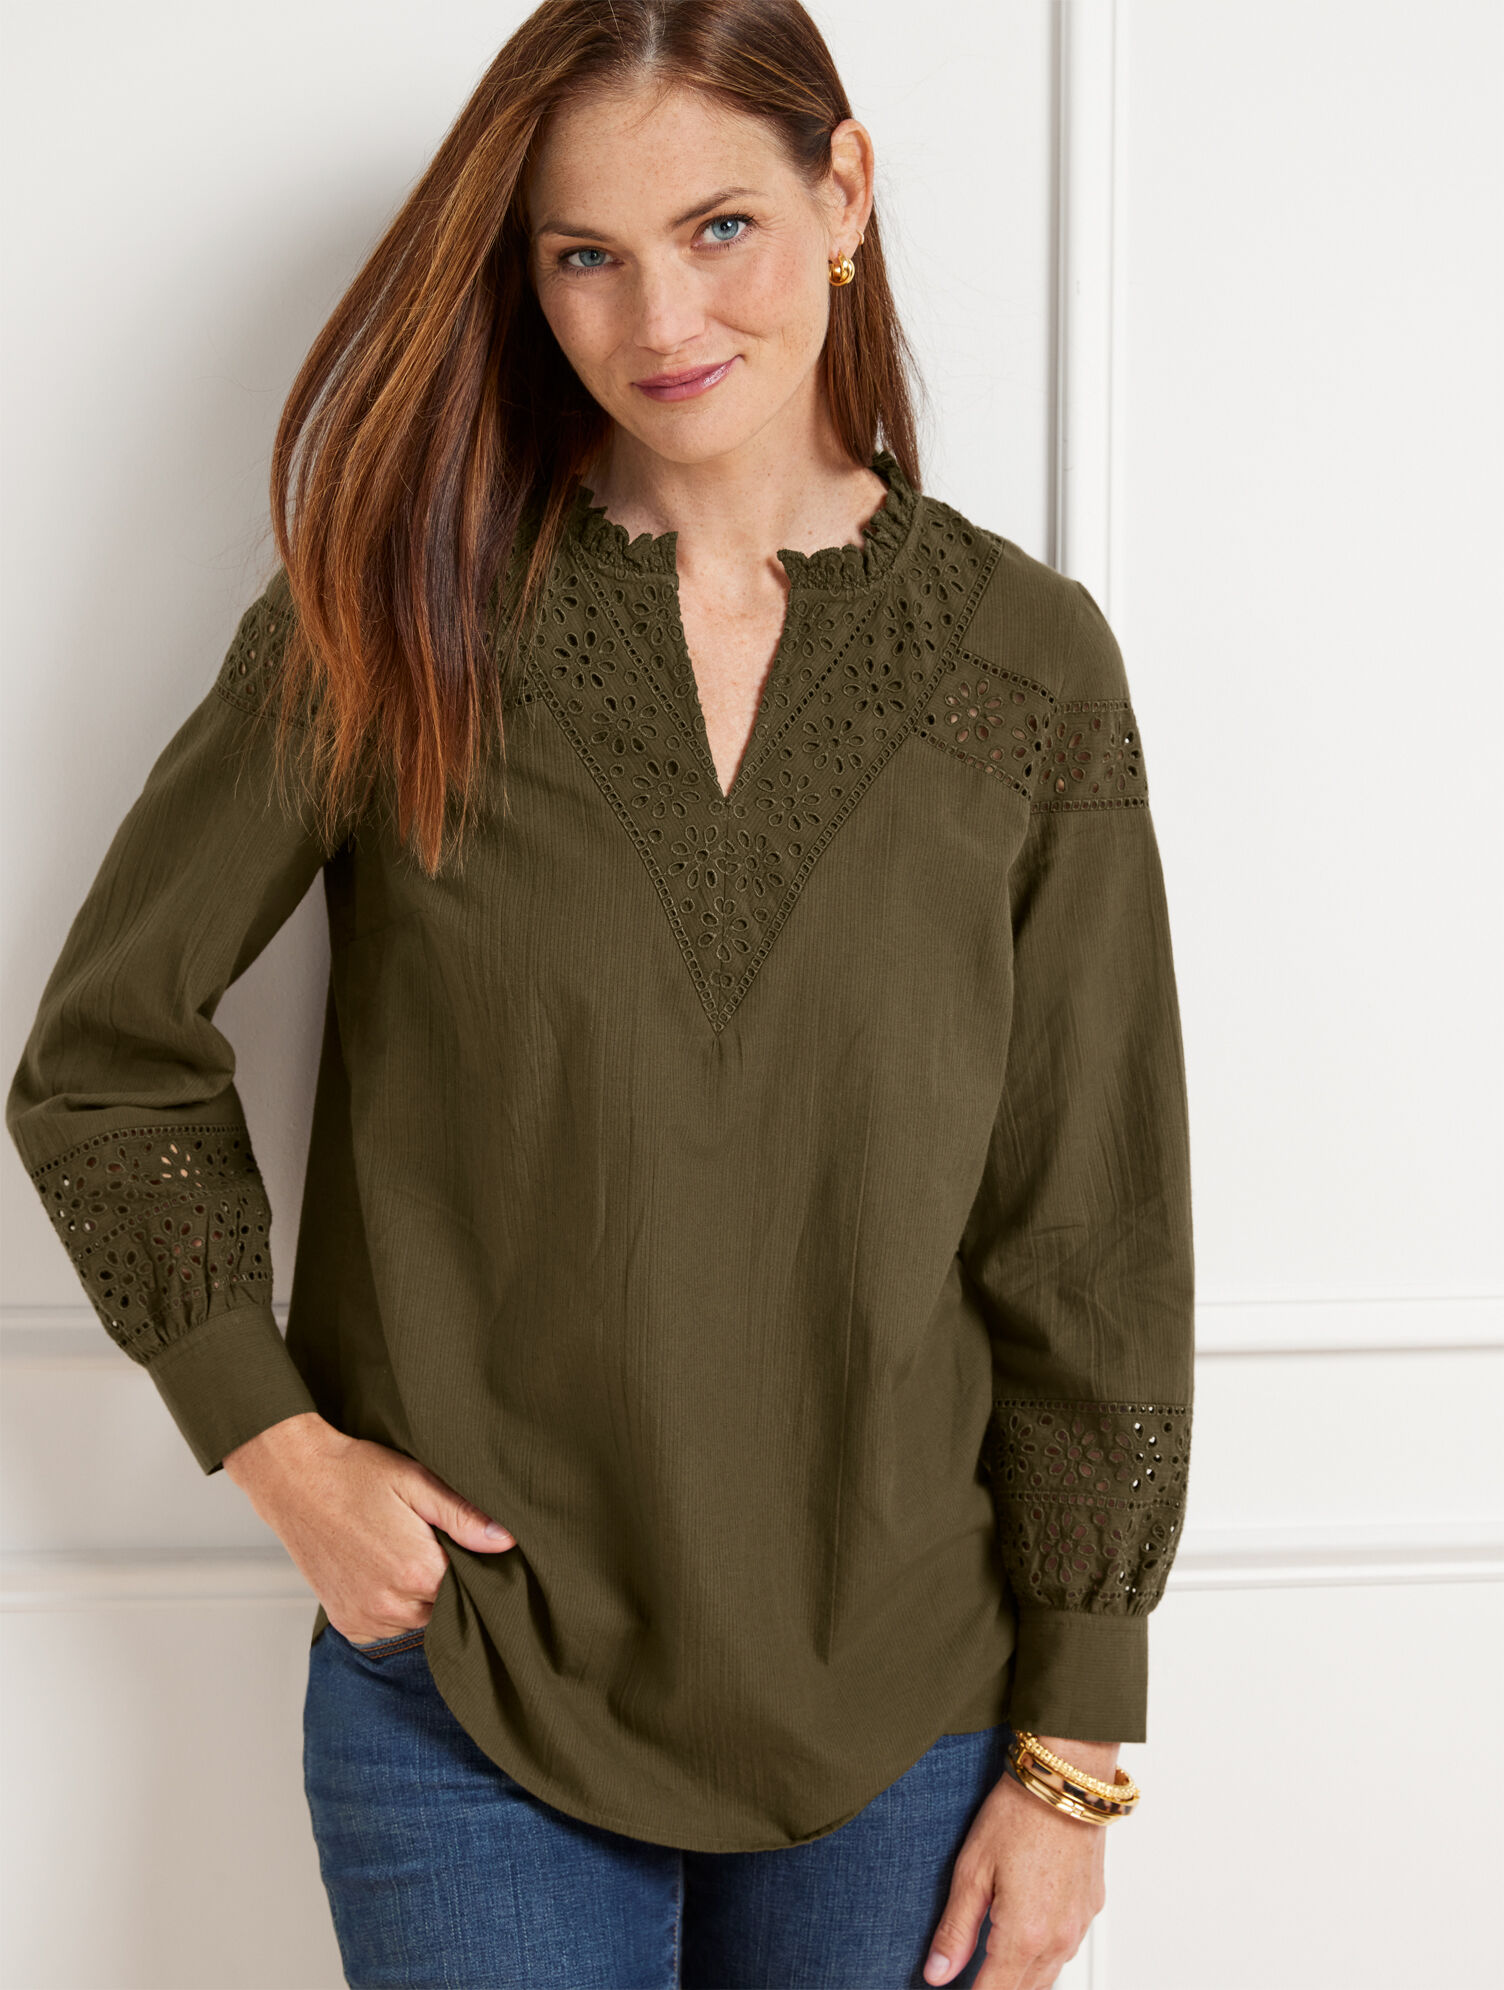 Eyelet Embroidered Top - Shadow Stripe | Talbots